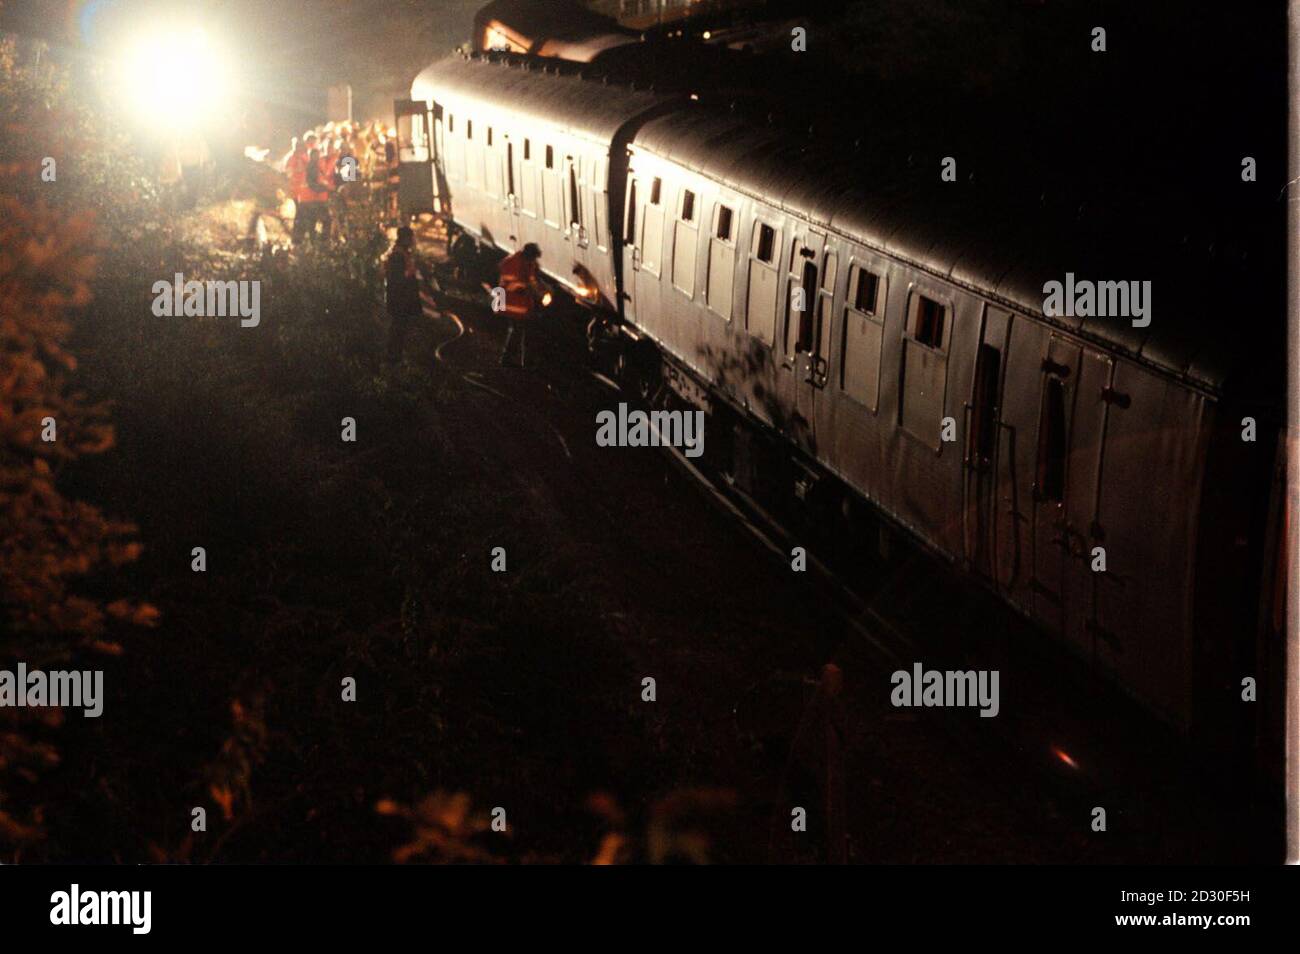 Railway engineers attend the scene outside Lewes Station, in east Sussex, after a busy commuter train hit a slow-moving train at a junction. No one was injured in the collision which came just 13 days after the Paddington rail disaster.  Stock Photo